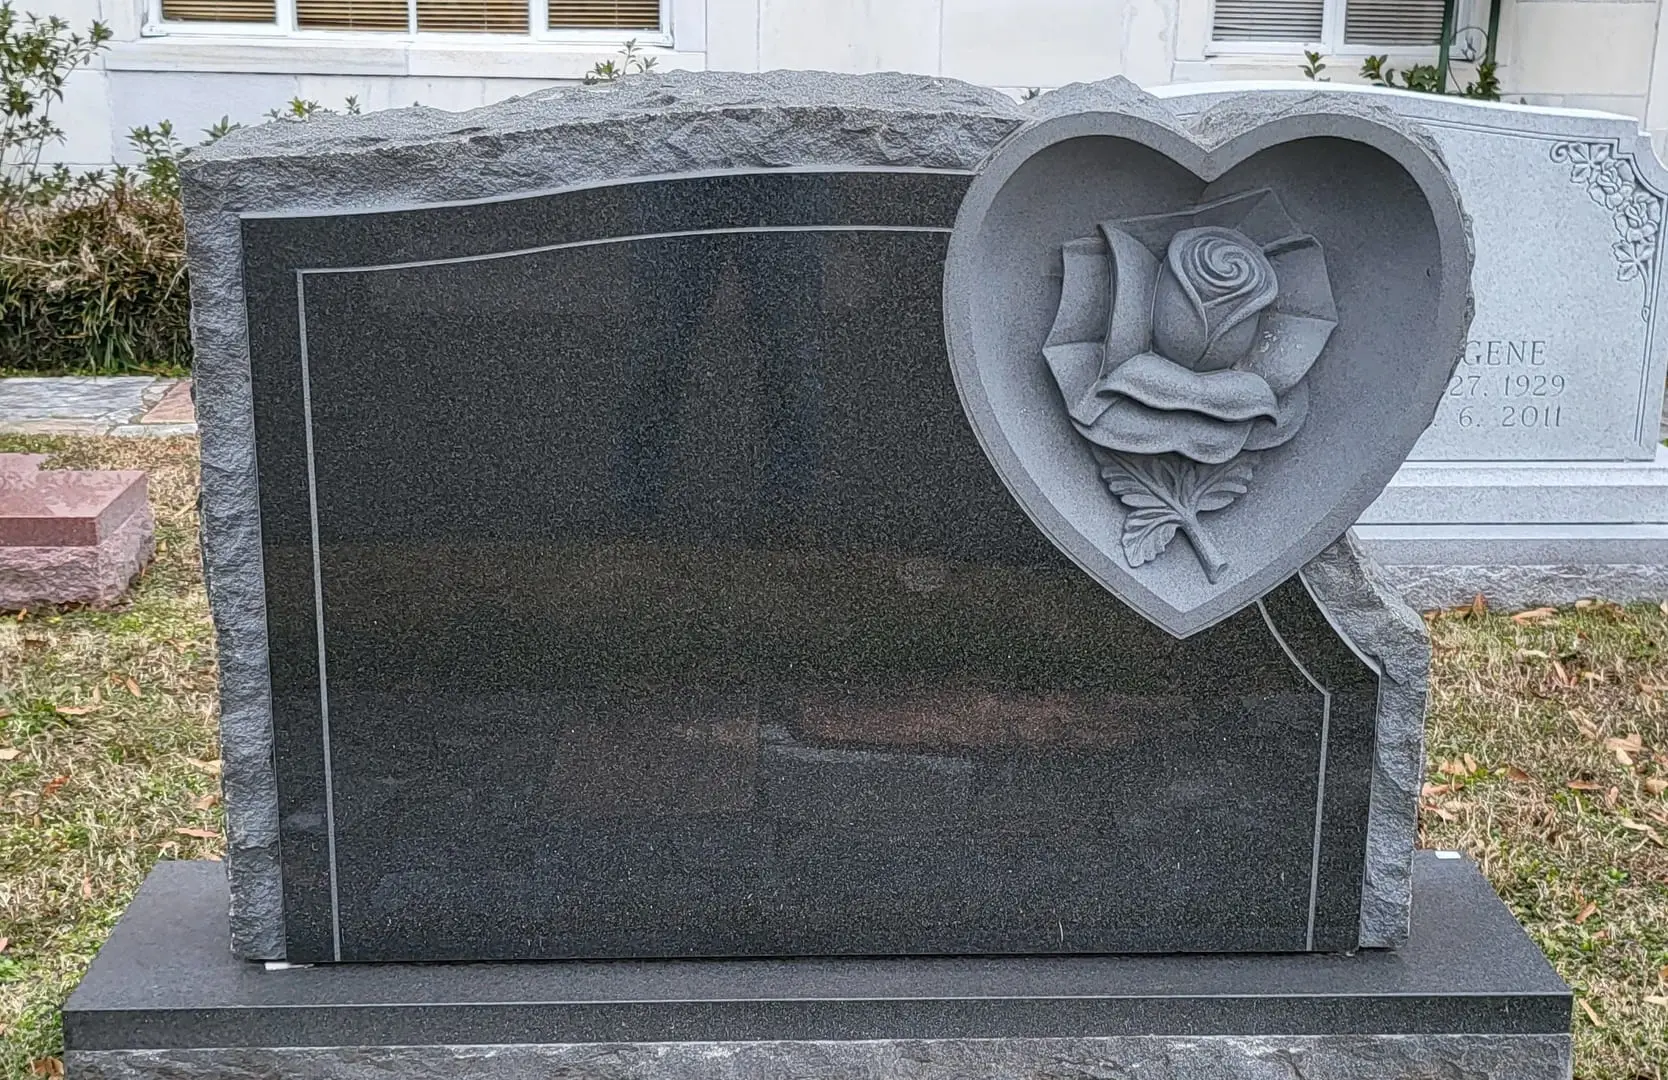 A beautiful memorial slab with a rose illustration